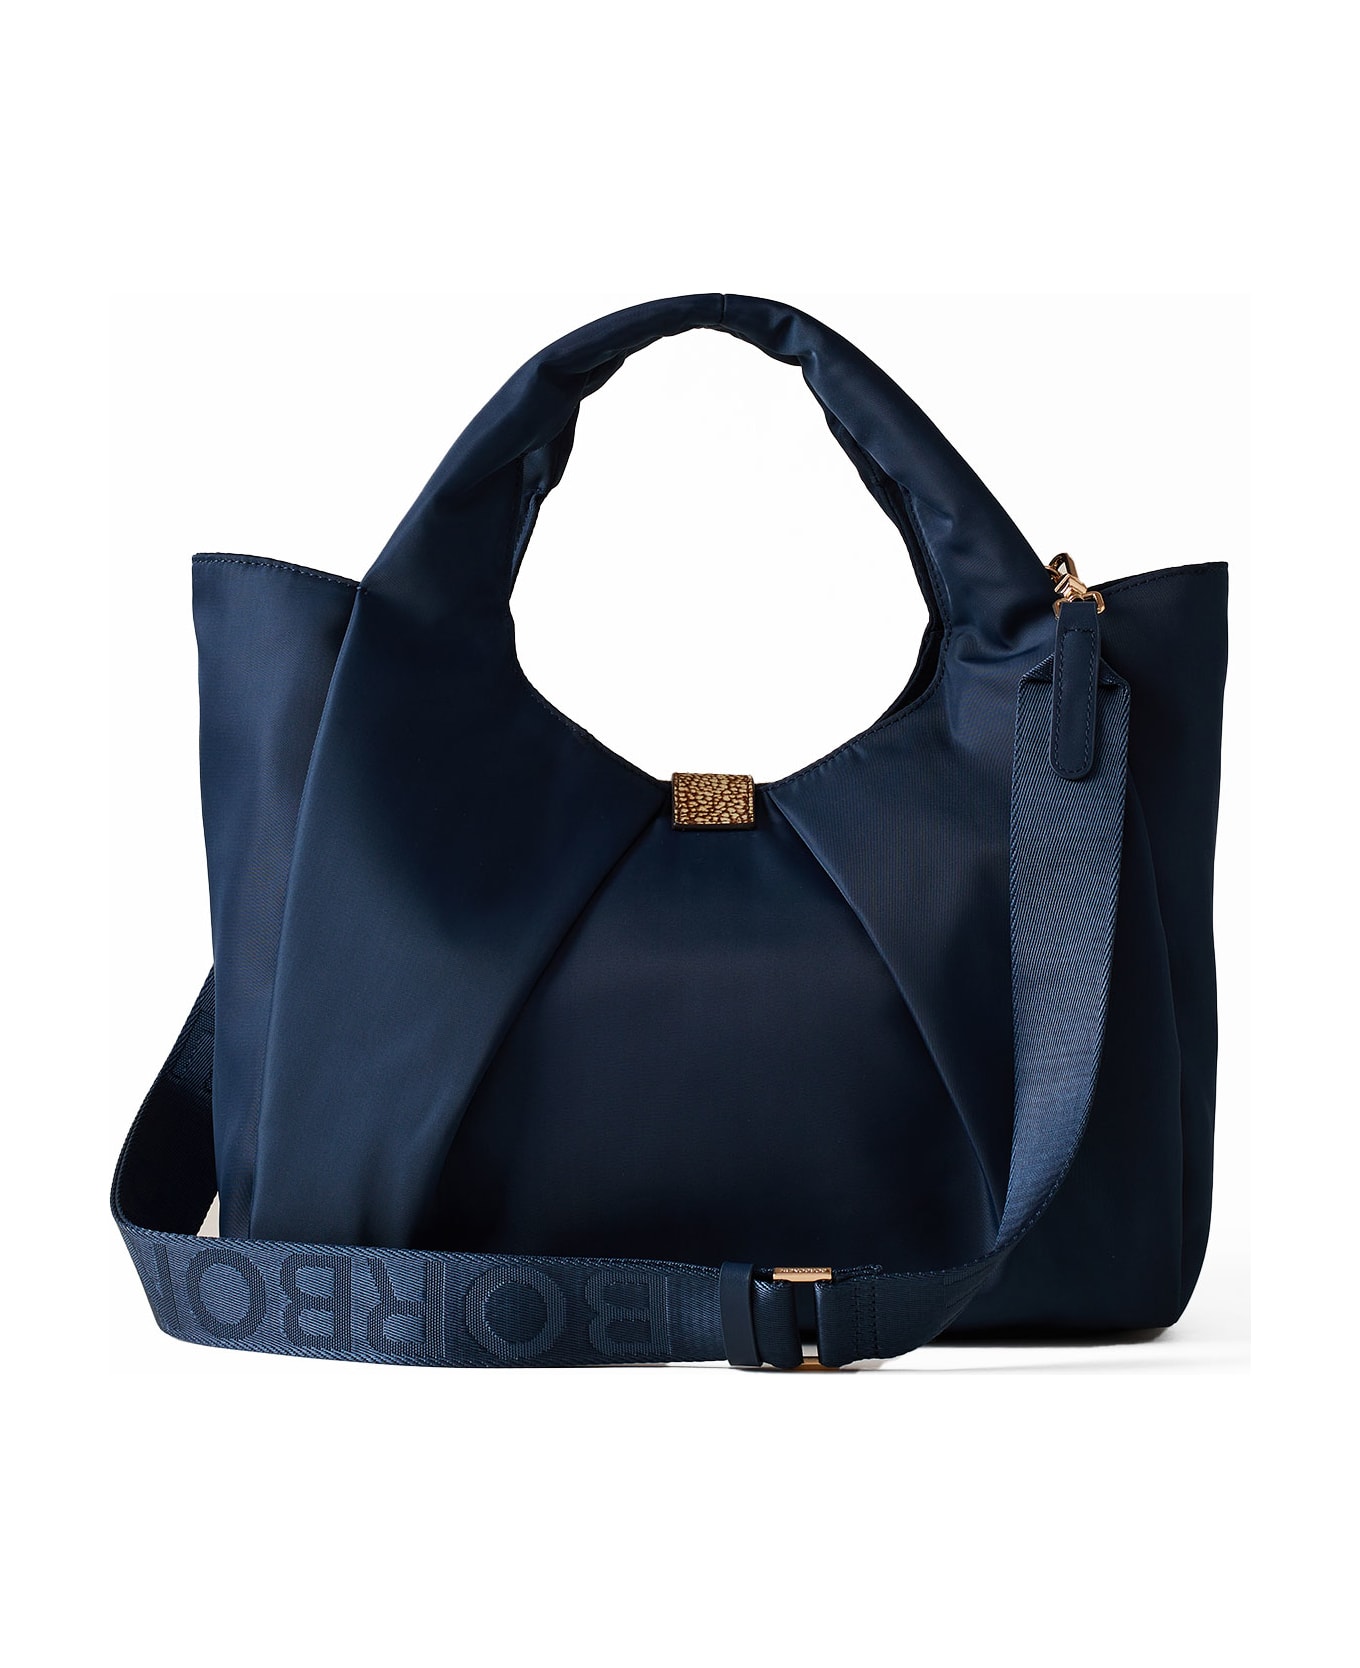 Borbonese Fabric And Leather Handbag With Shoulder Strap - BLU PRUSSIA/OP NAURALE